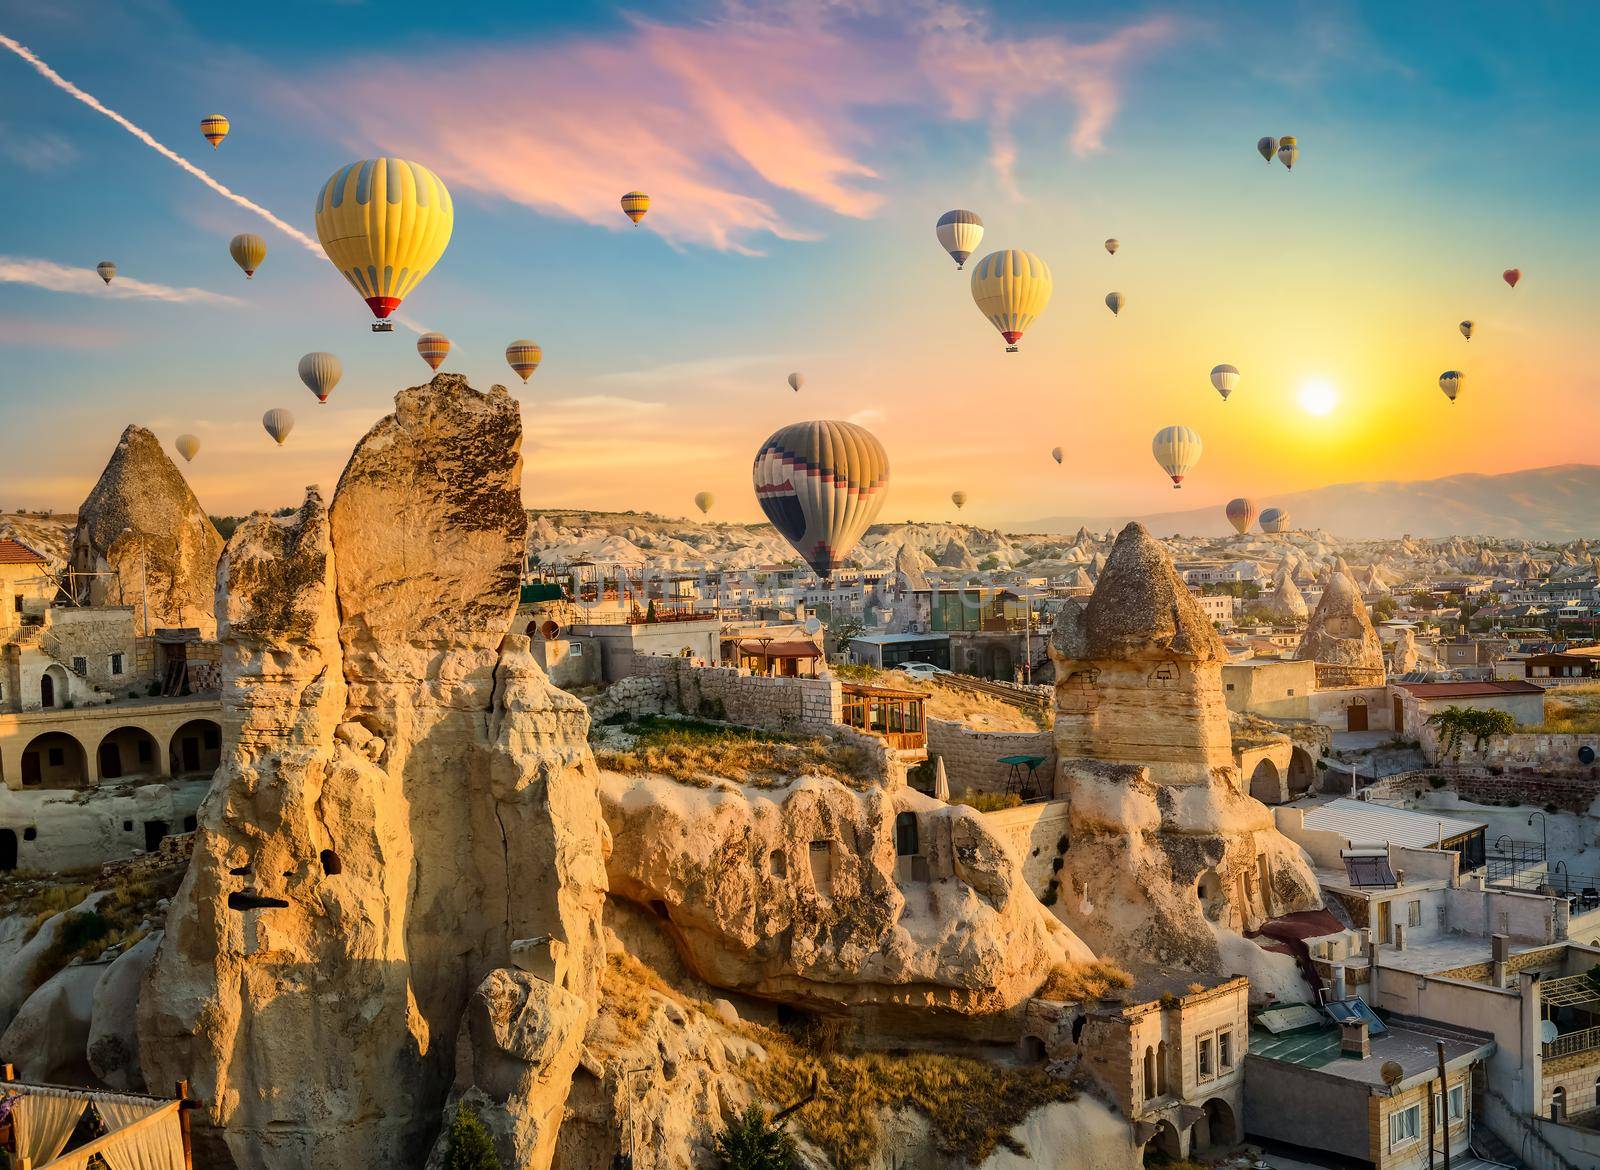 Balloons in Goreme by Givaga